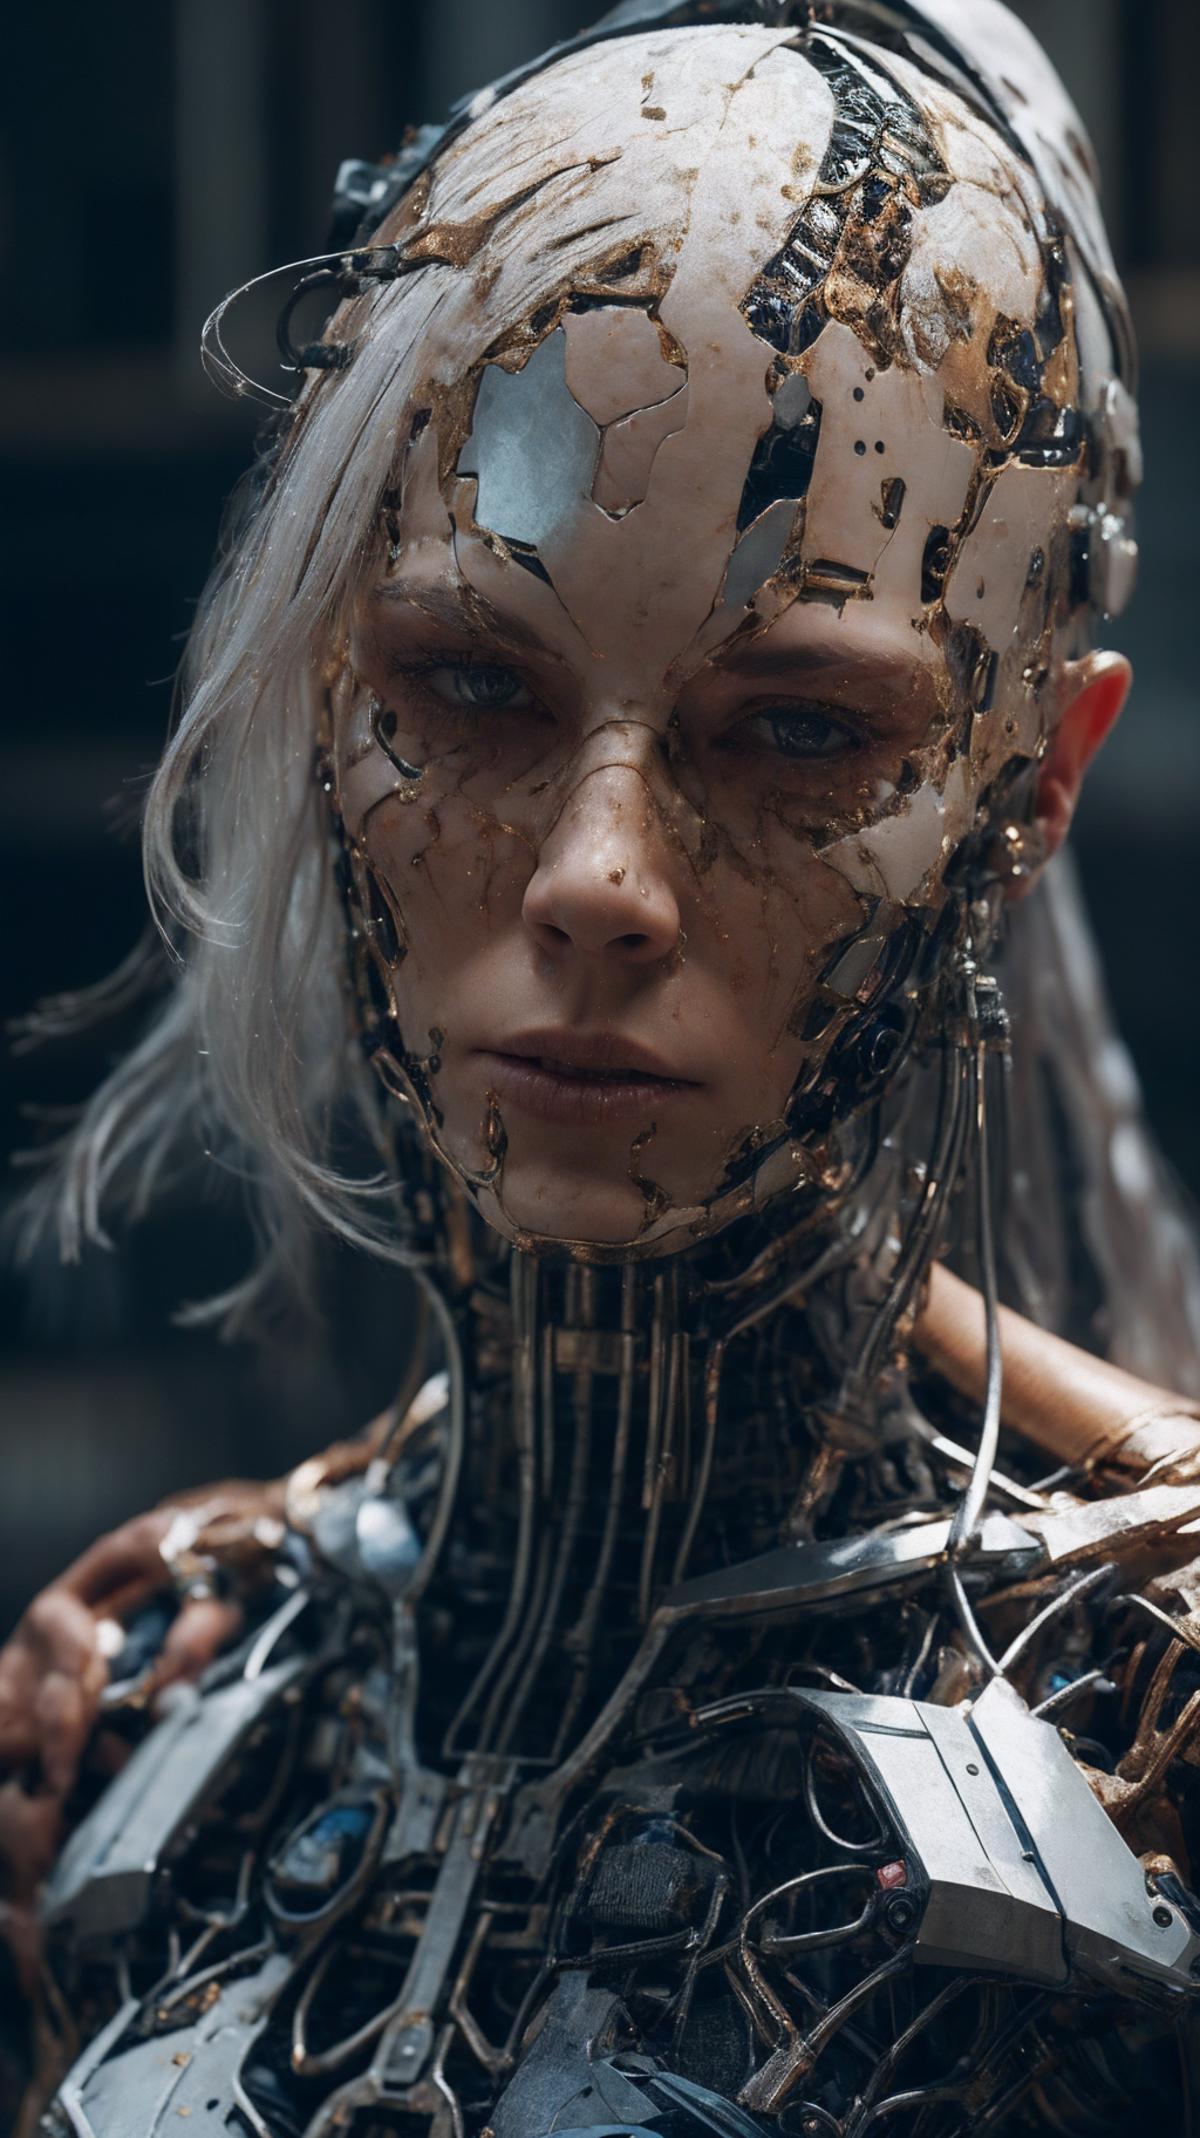 A cybernetic woman with white hair and blue eyes wearing a metallic mask and gold accents.